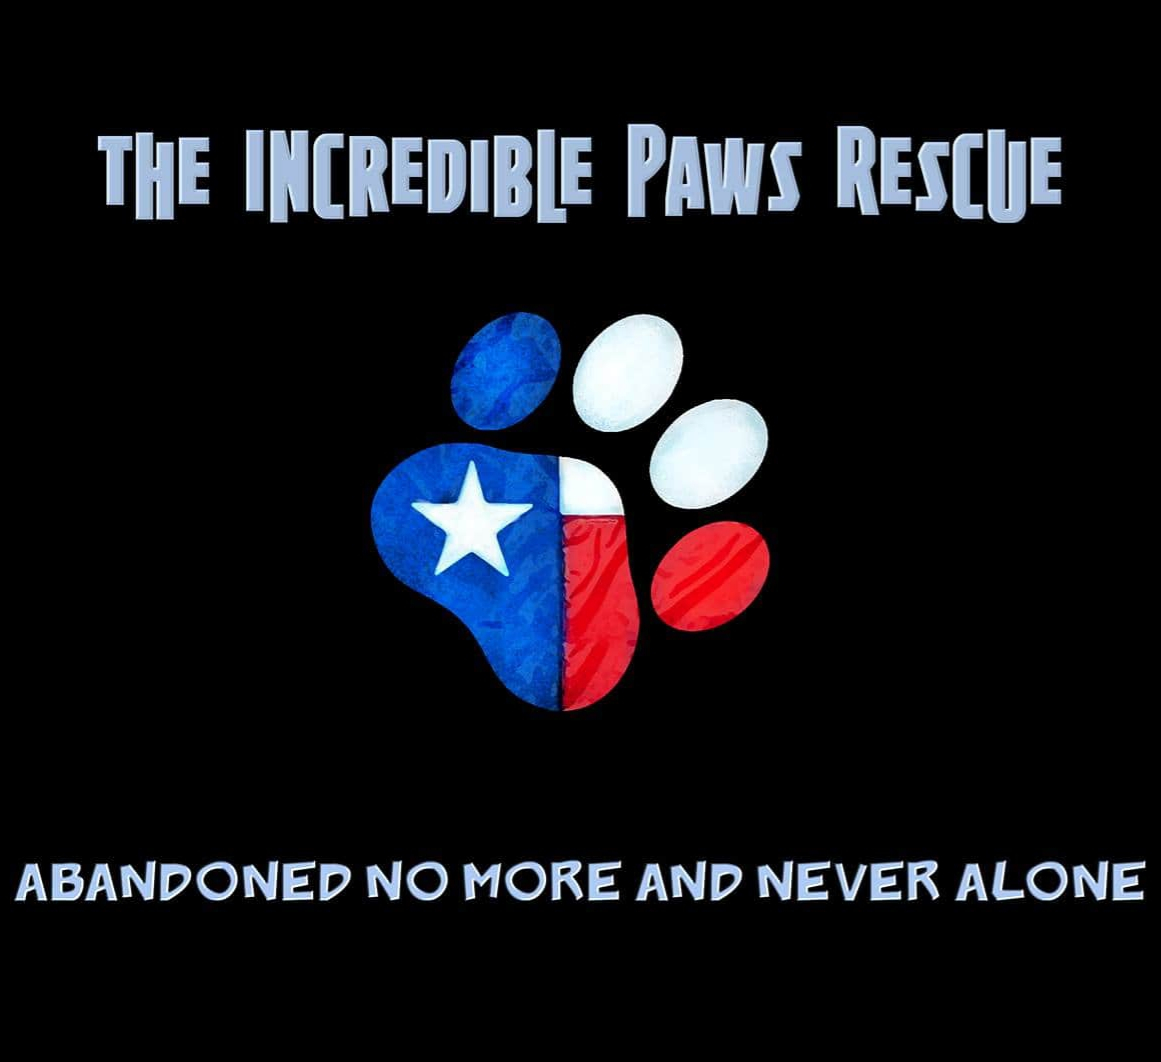 The Incredible Paws Rescue